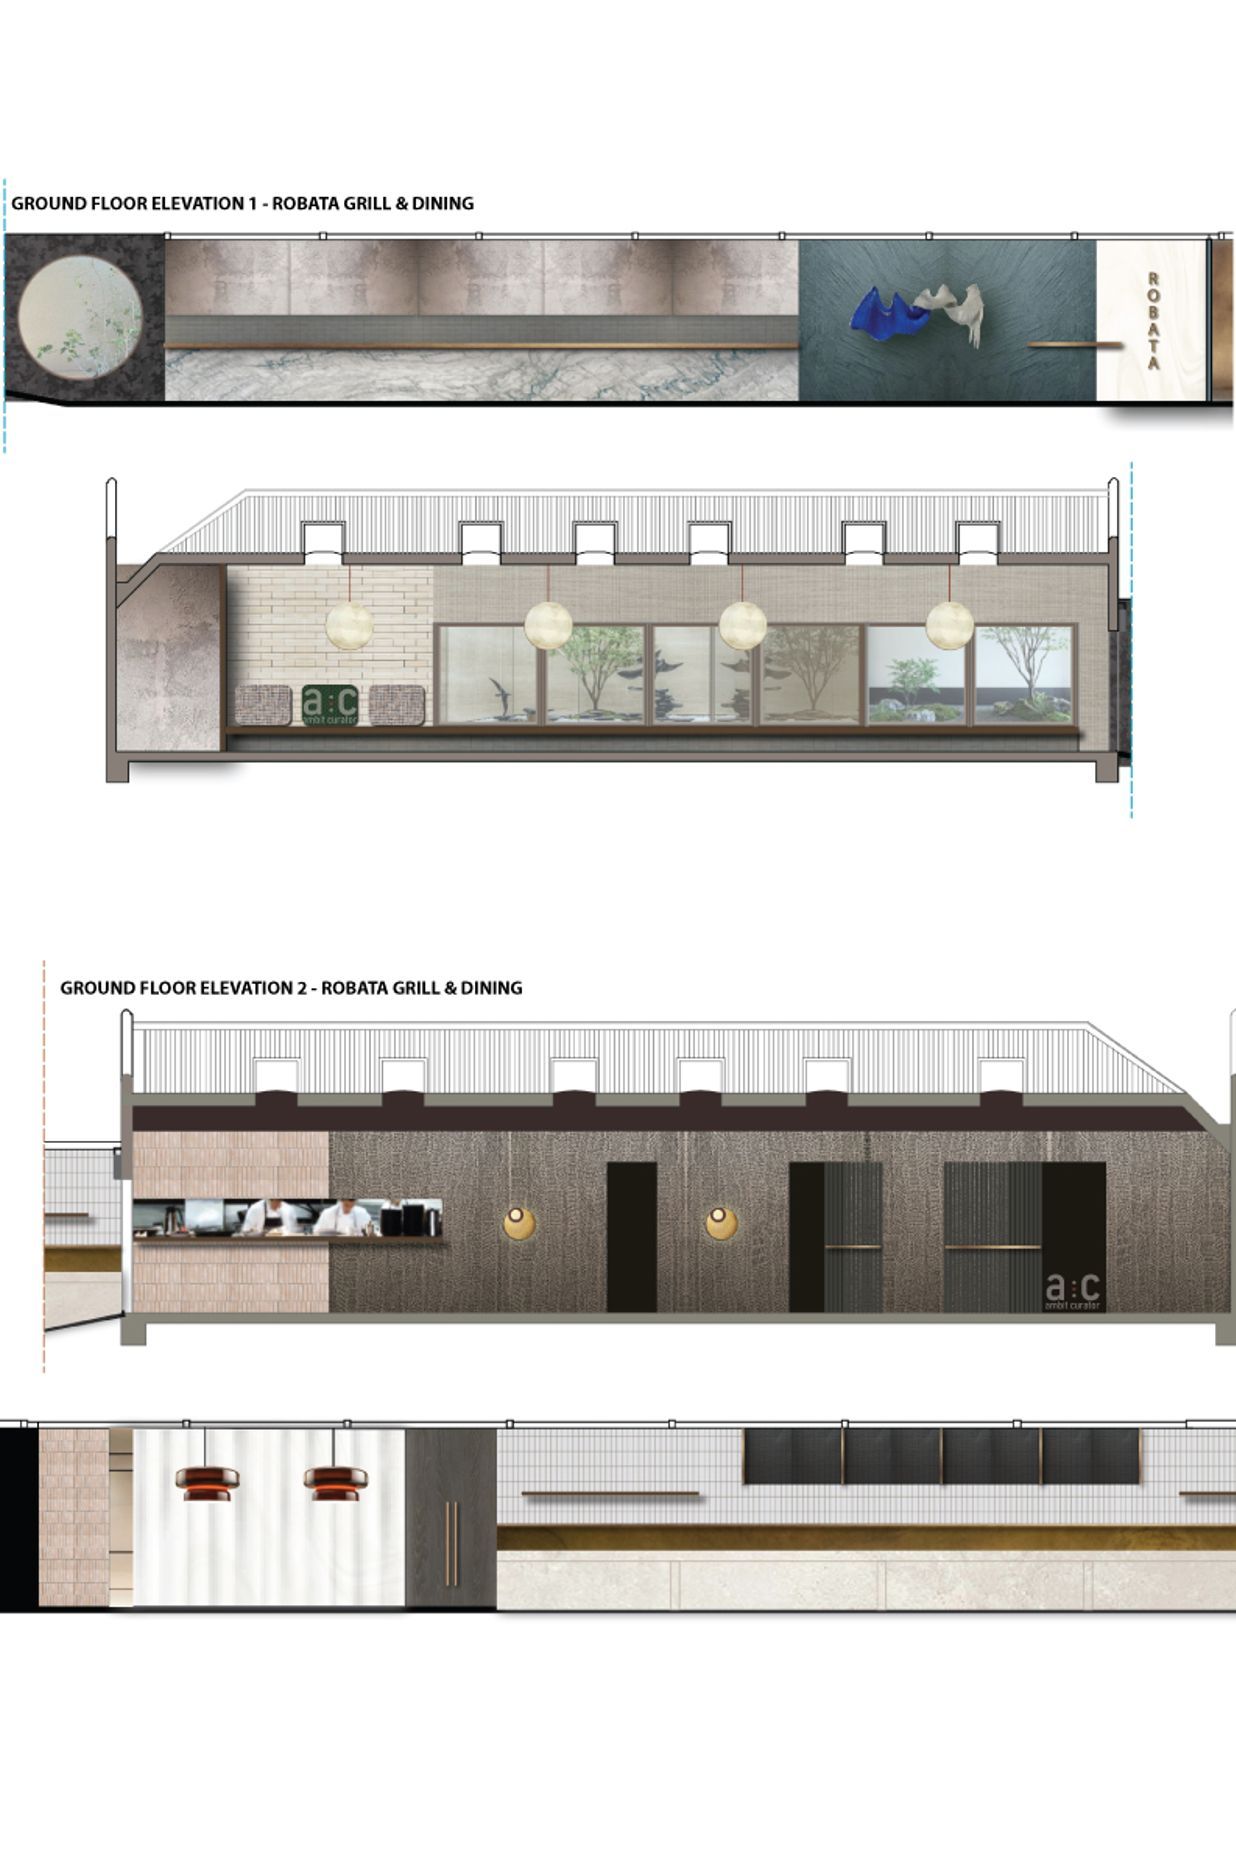 Concept design for ground floor Robata grille, bar and dining setting